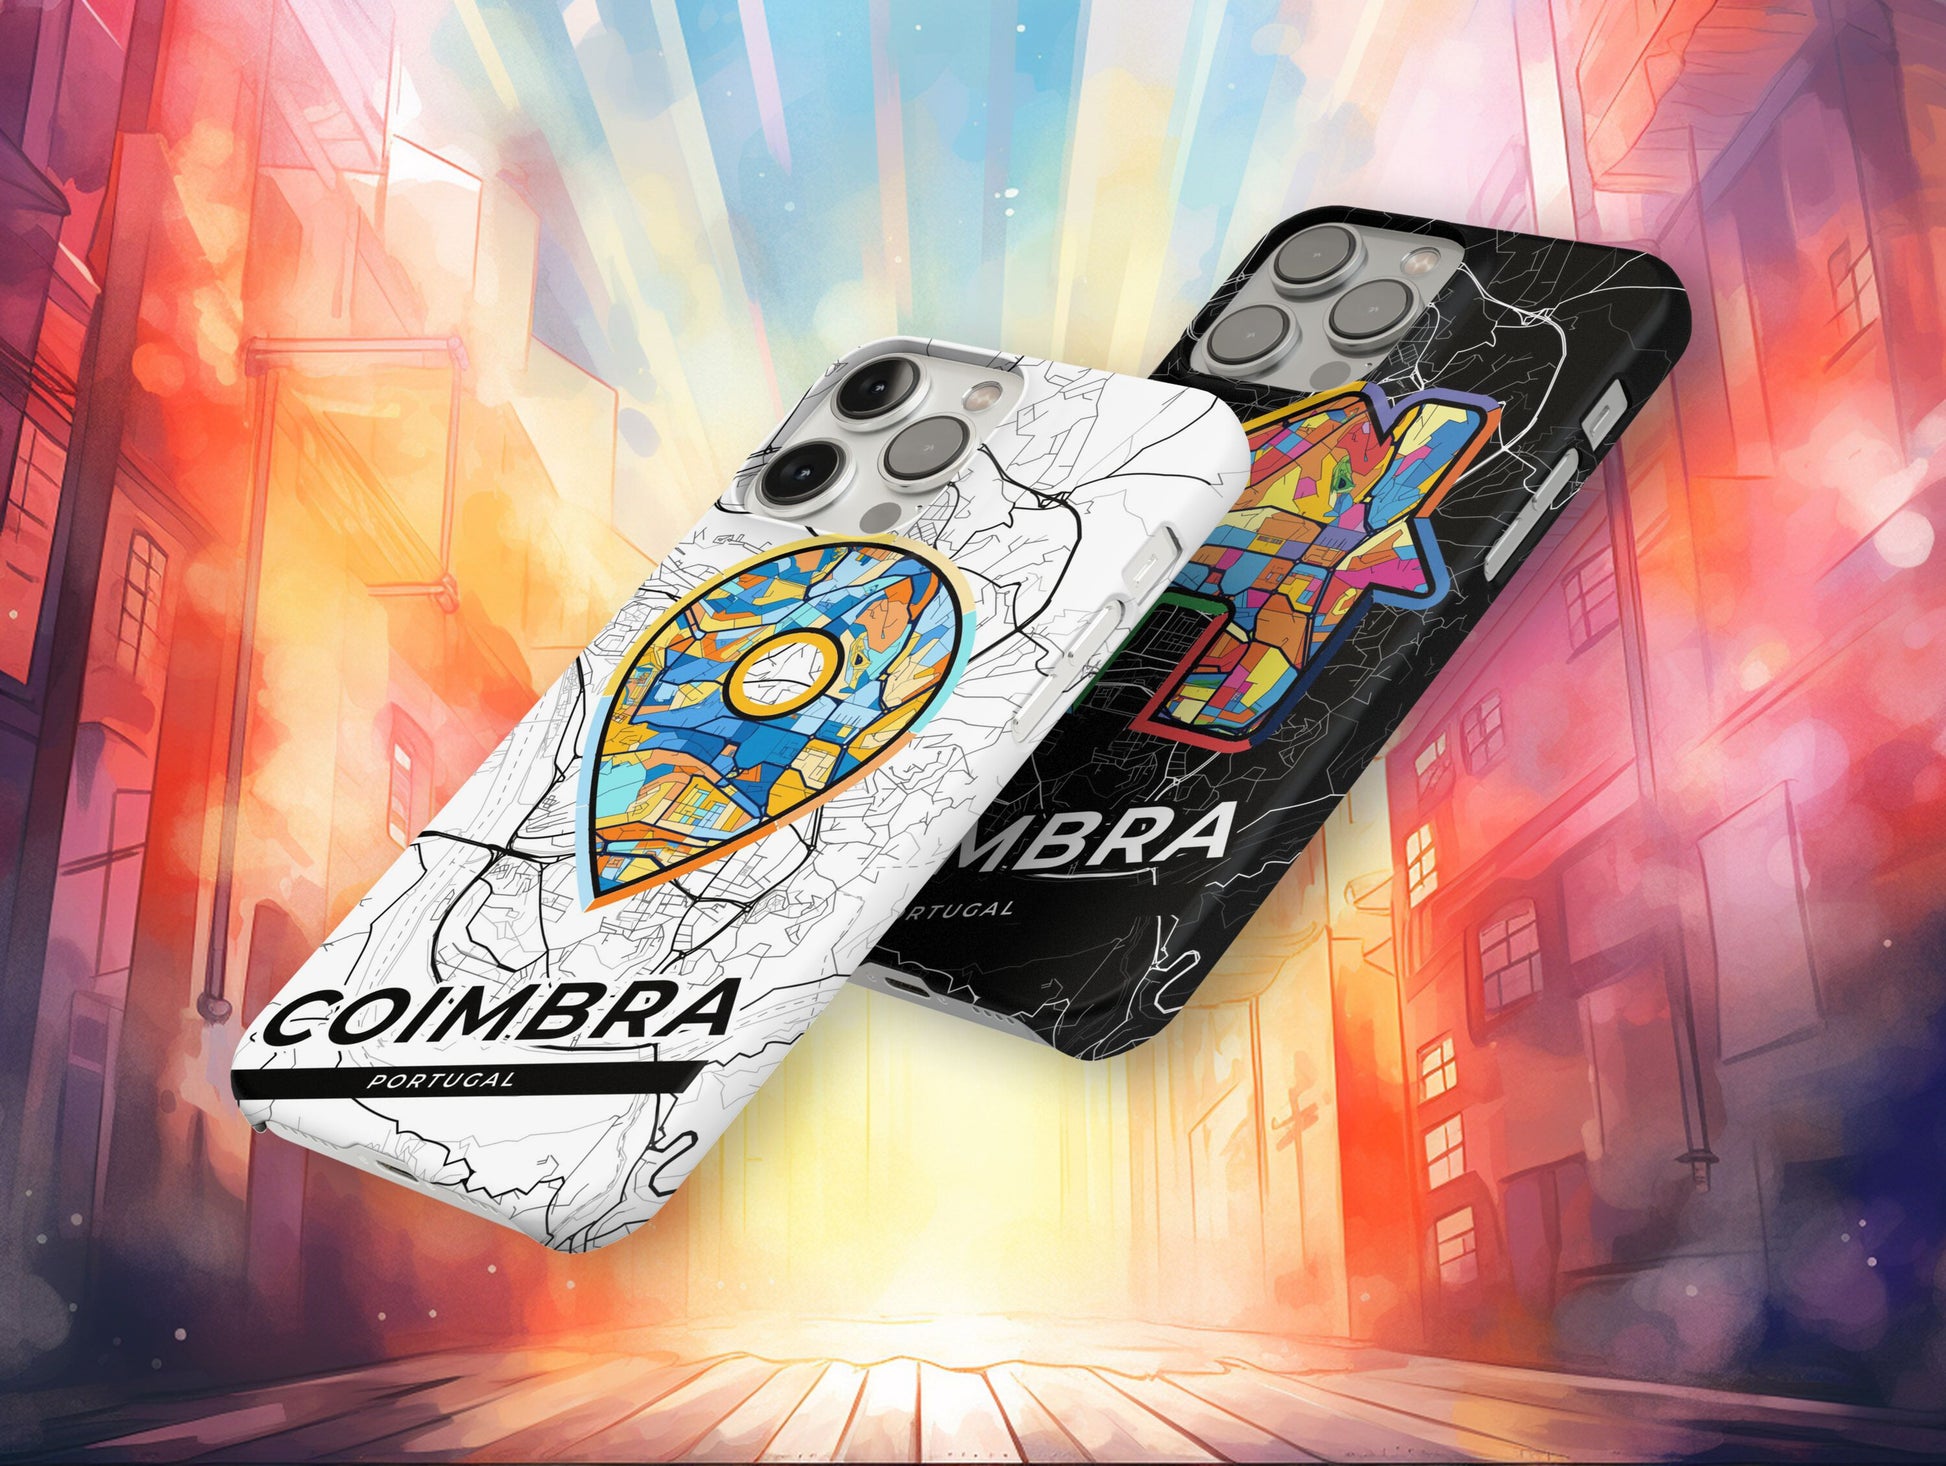 Coimbra Portugal slim phone case with colorful icon. Birthday, wedding or housewarming gift. Couple match cases.